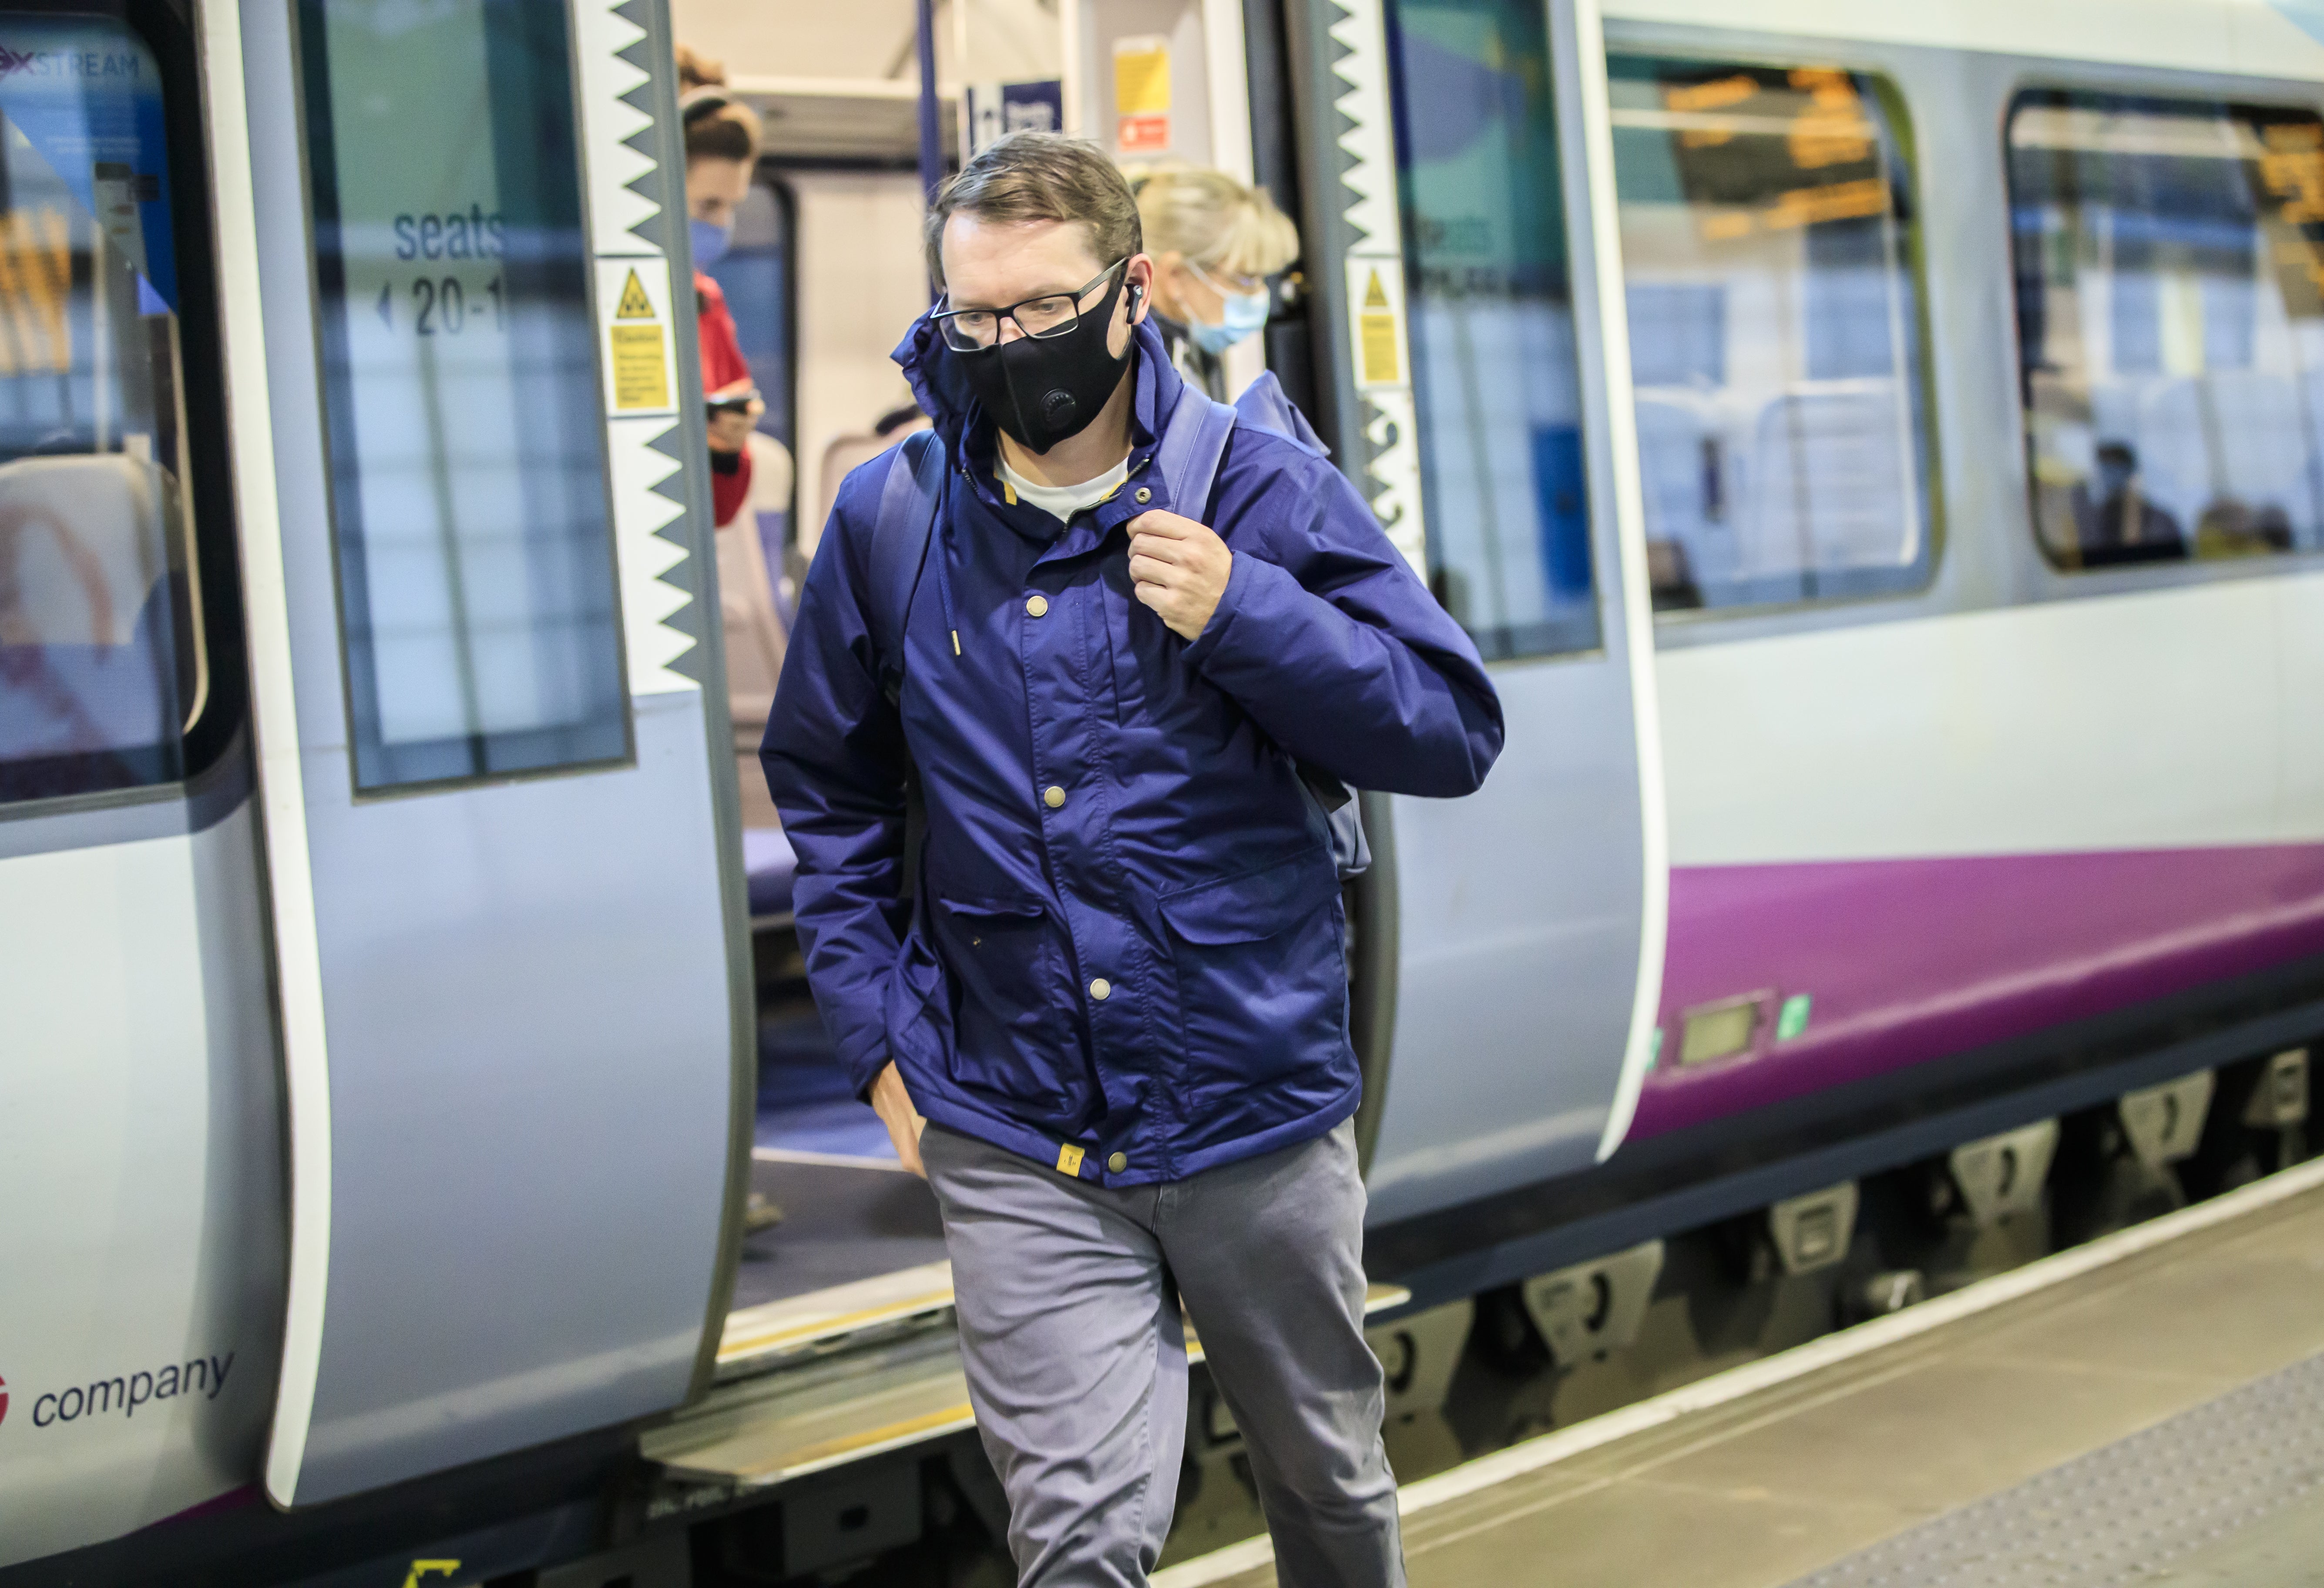 New figures show commuter journeys on Britain’s railways remain at less than half of pre-pandemic levels (Danny Lawson/PA)